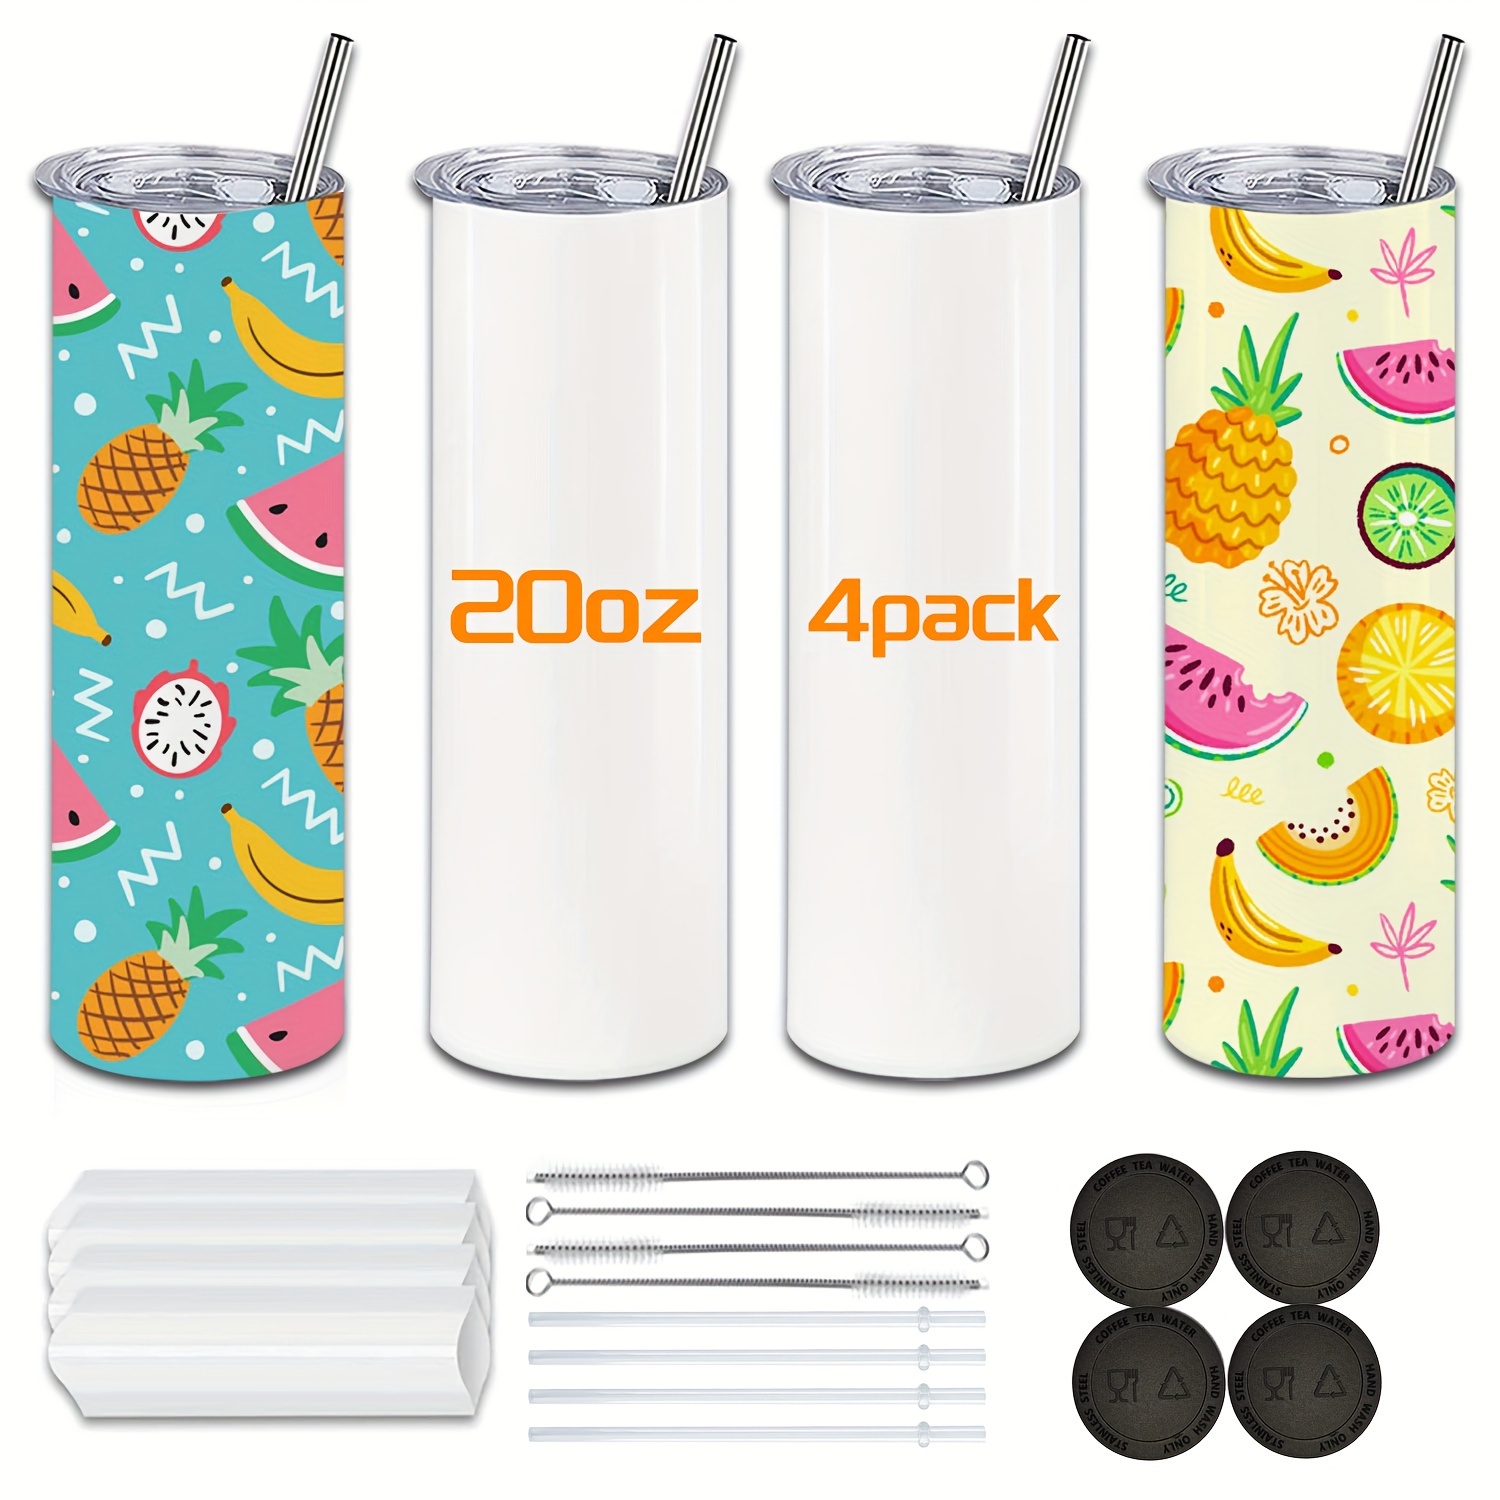  Kocdam 4 Pack Sublimation Tumblers with Lids and Straws Bulk, 20oz  Sublimation Tumbler Blank, Stainless Steel Double Wall Sublimation Tumblers  20 oz Skinny, Polymer Coating for Heat Transfer : Arts, Crafts